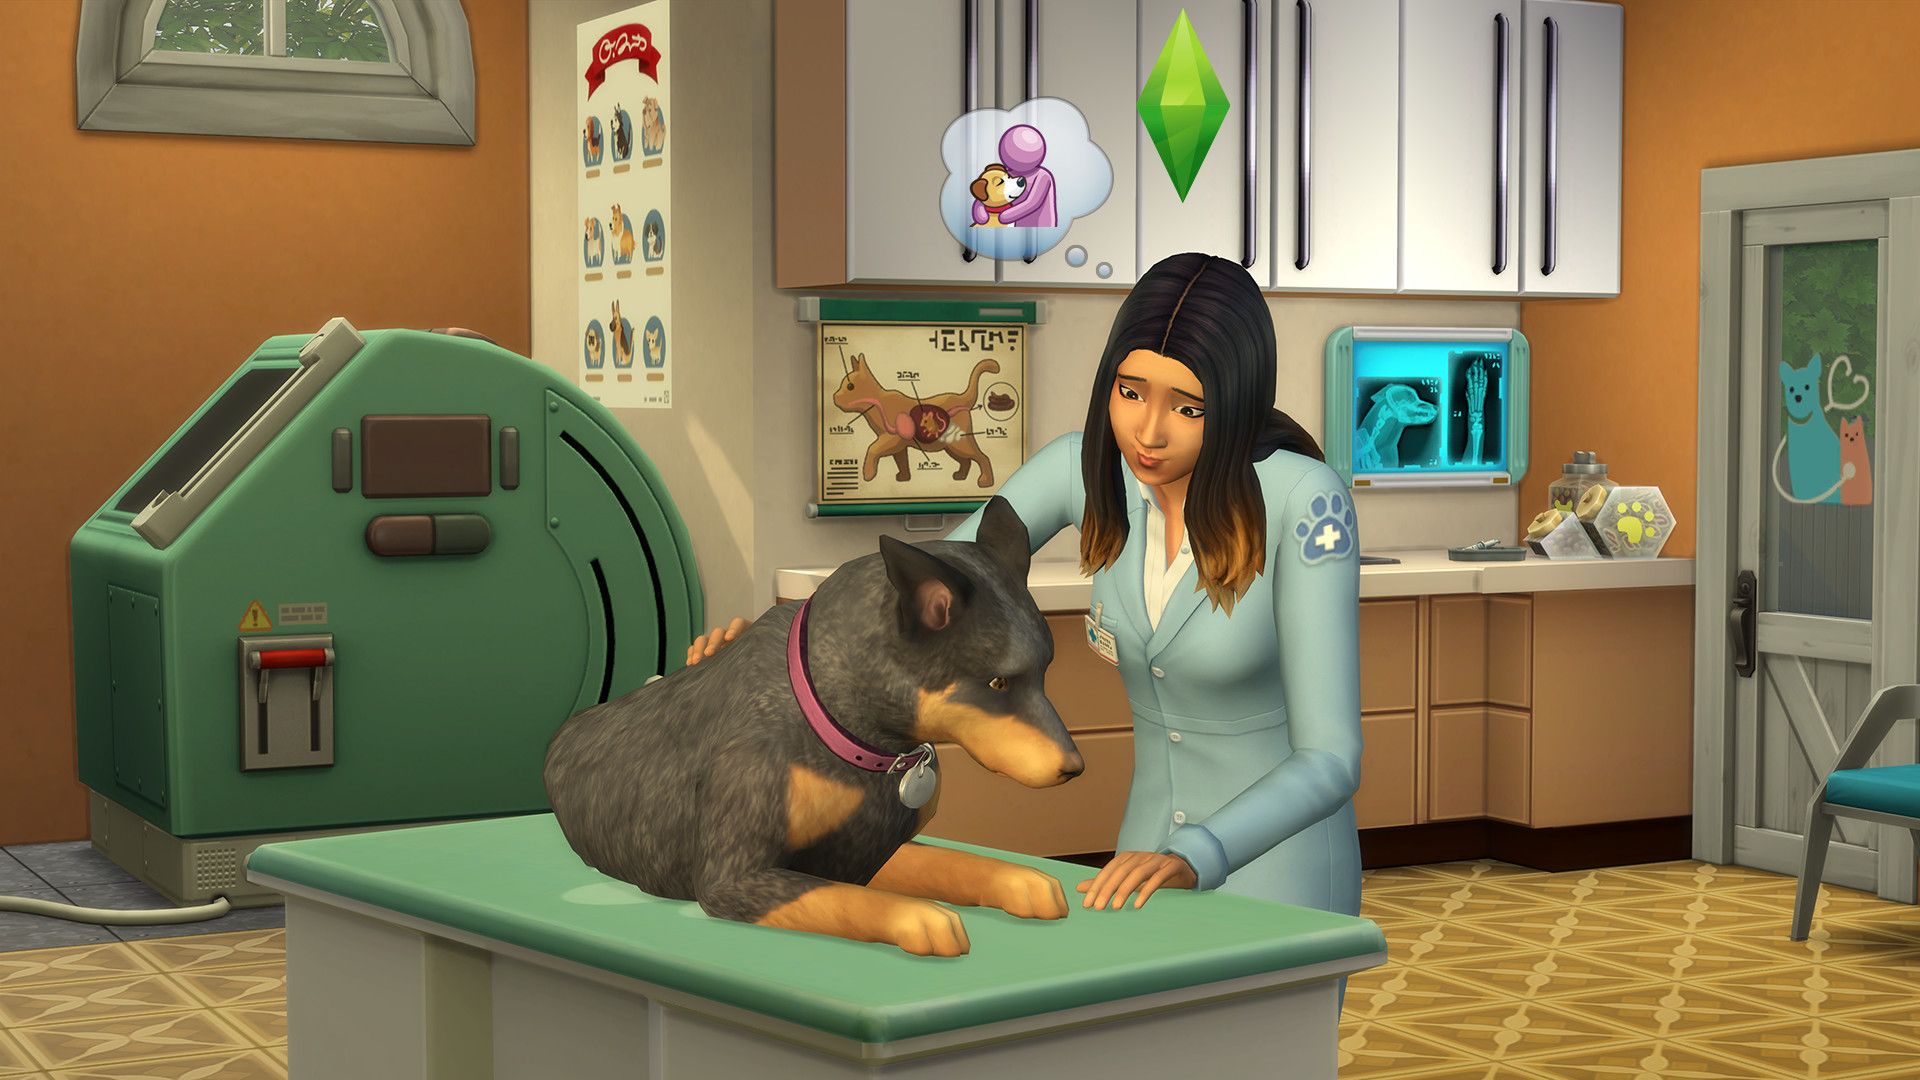 the sims 4 all dlc cats and dogs free